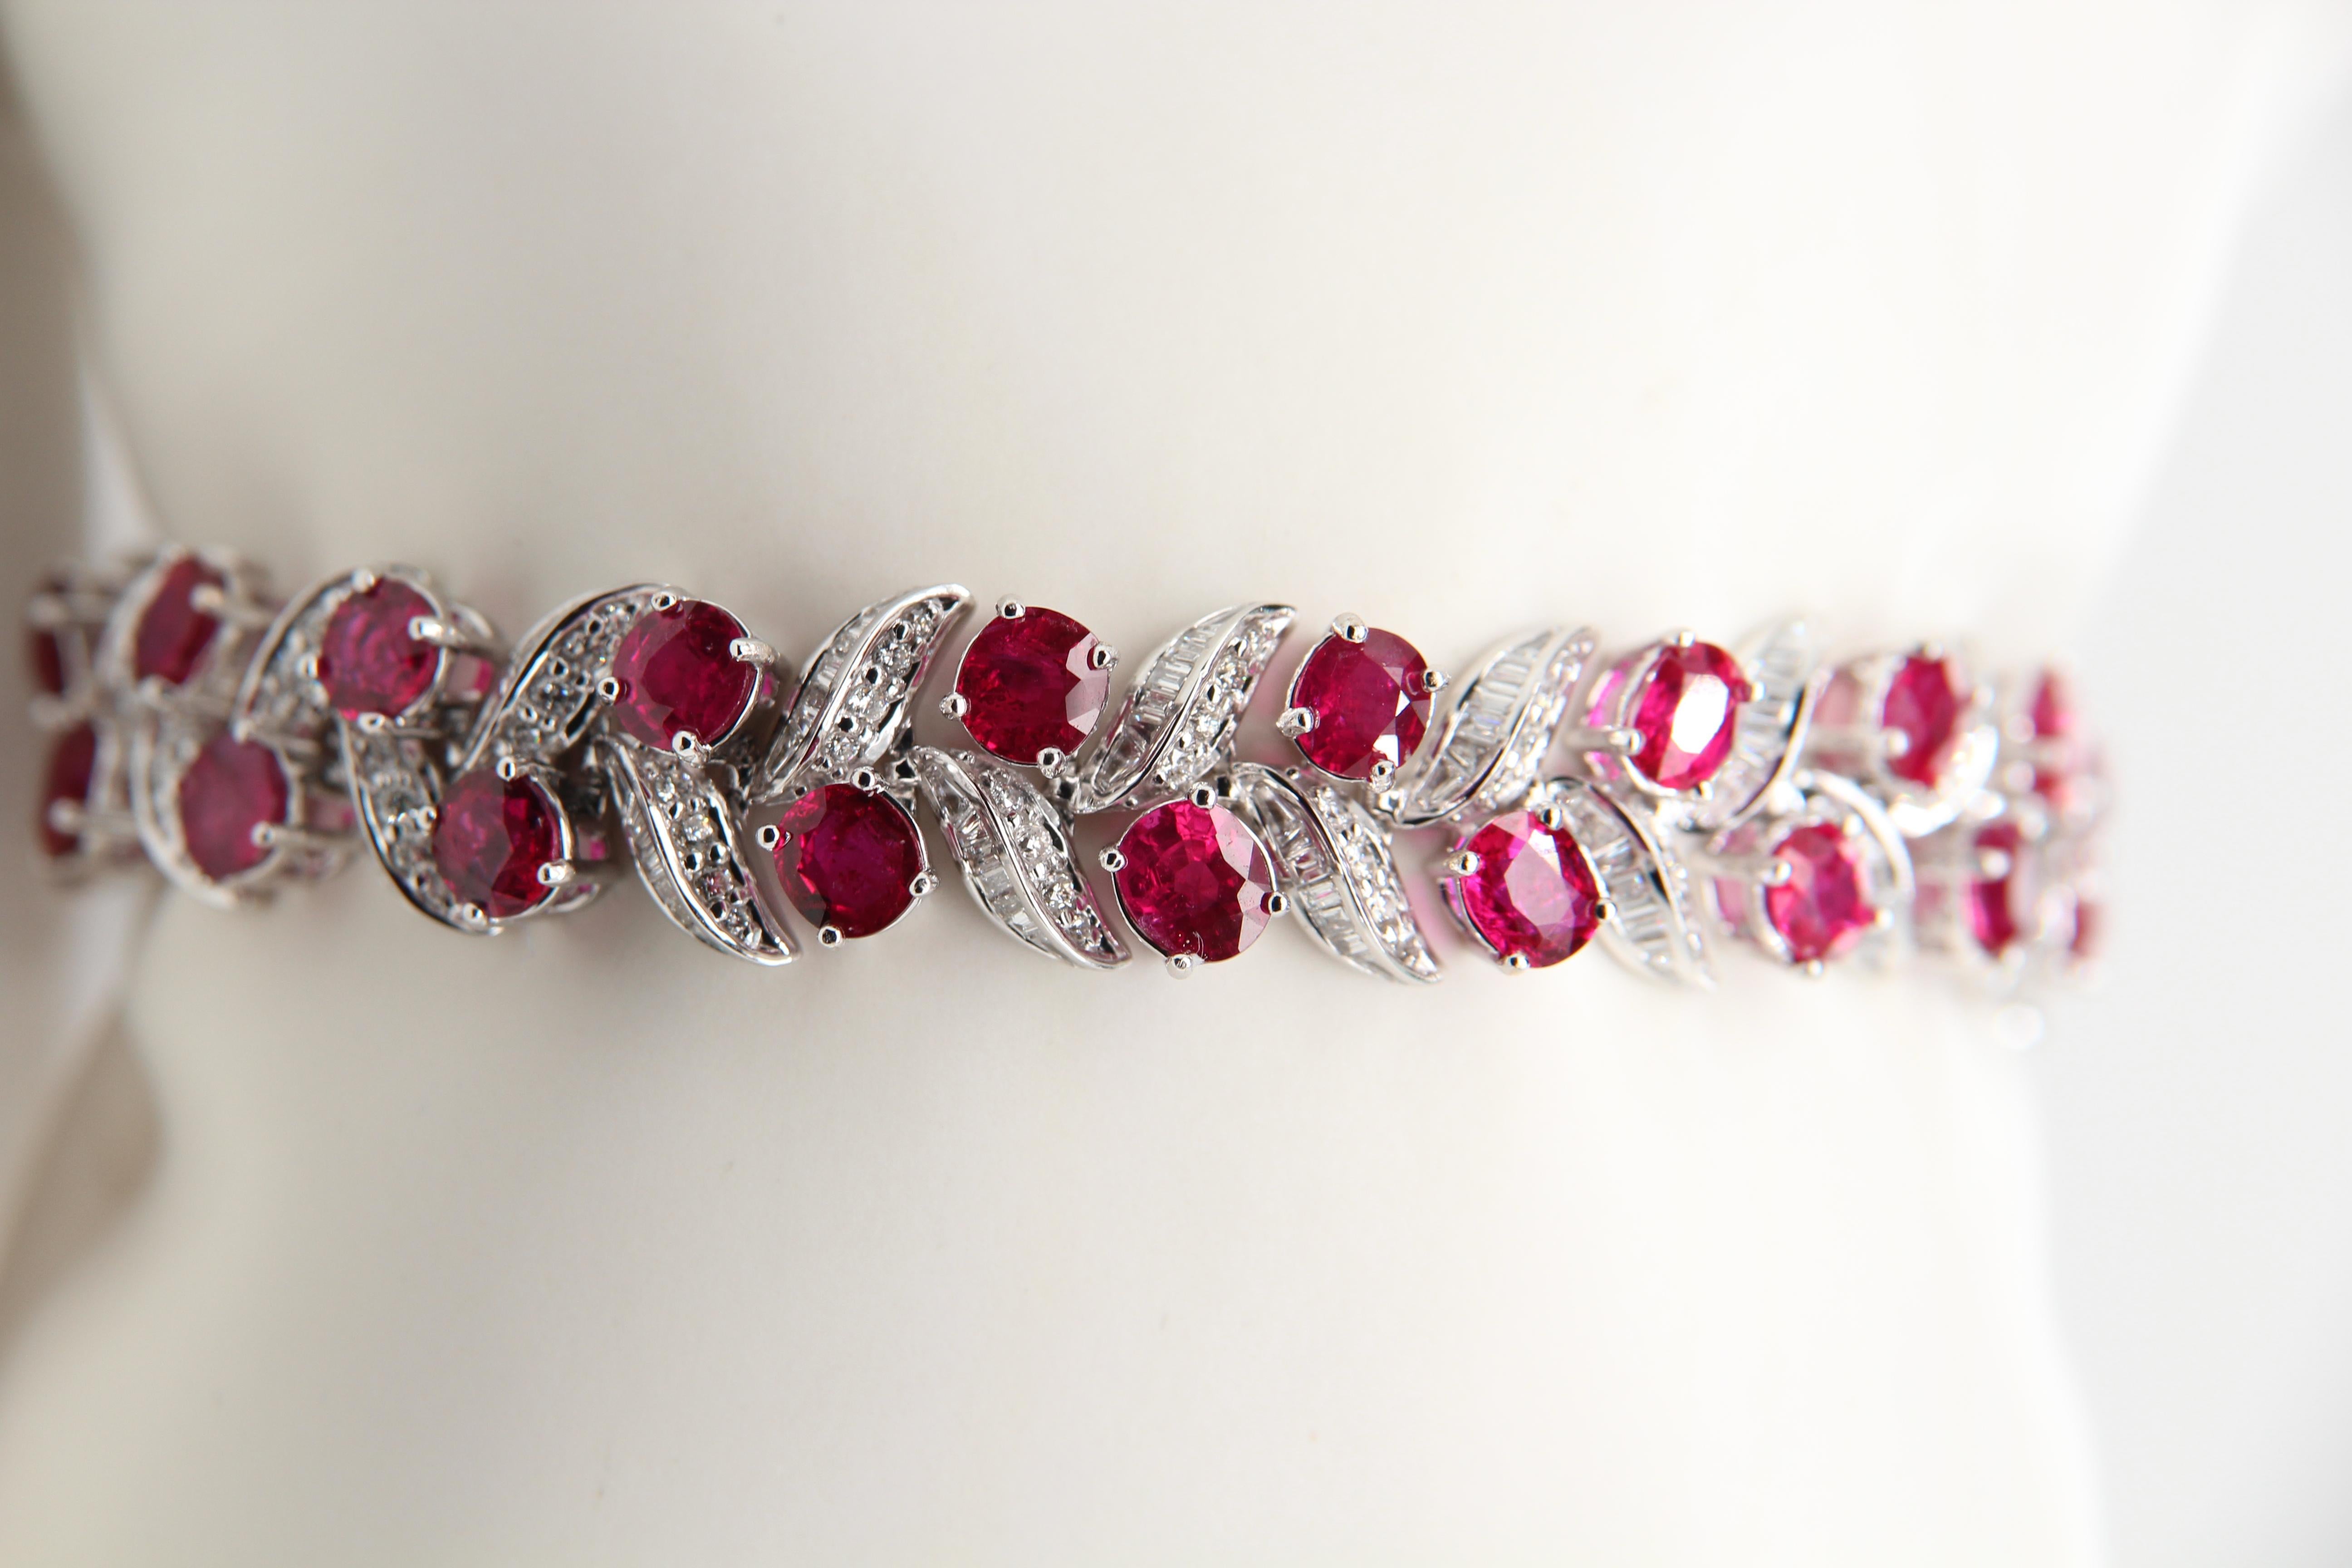 A new ruby and diamond bracelet made in 18 Karat gold. The rubies are all Burmese no heat certified by the International Colorstone Association (ICA) GemLab. The total ruby weight is 14.83 carats and the total diamond weight is 3.40 carats. The